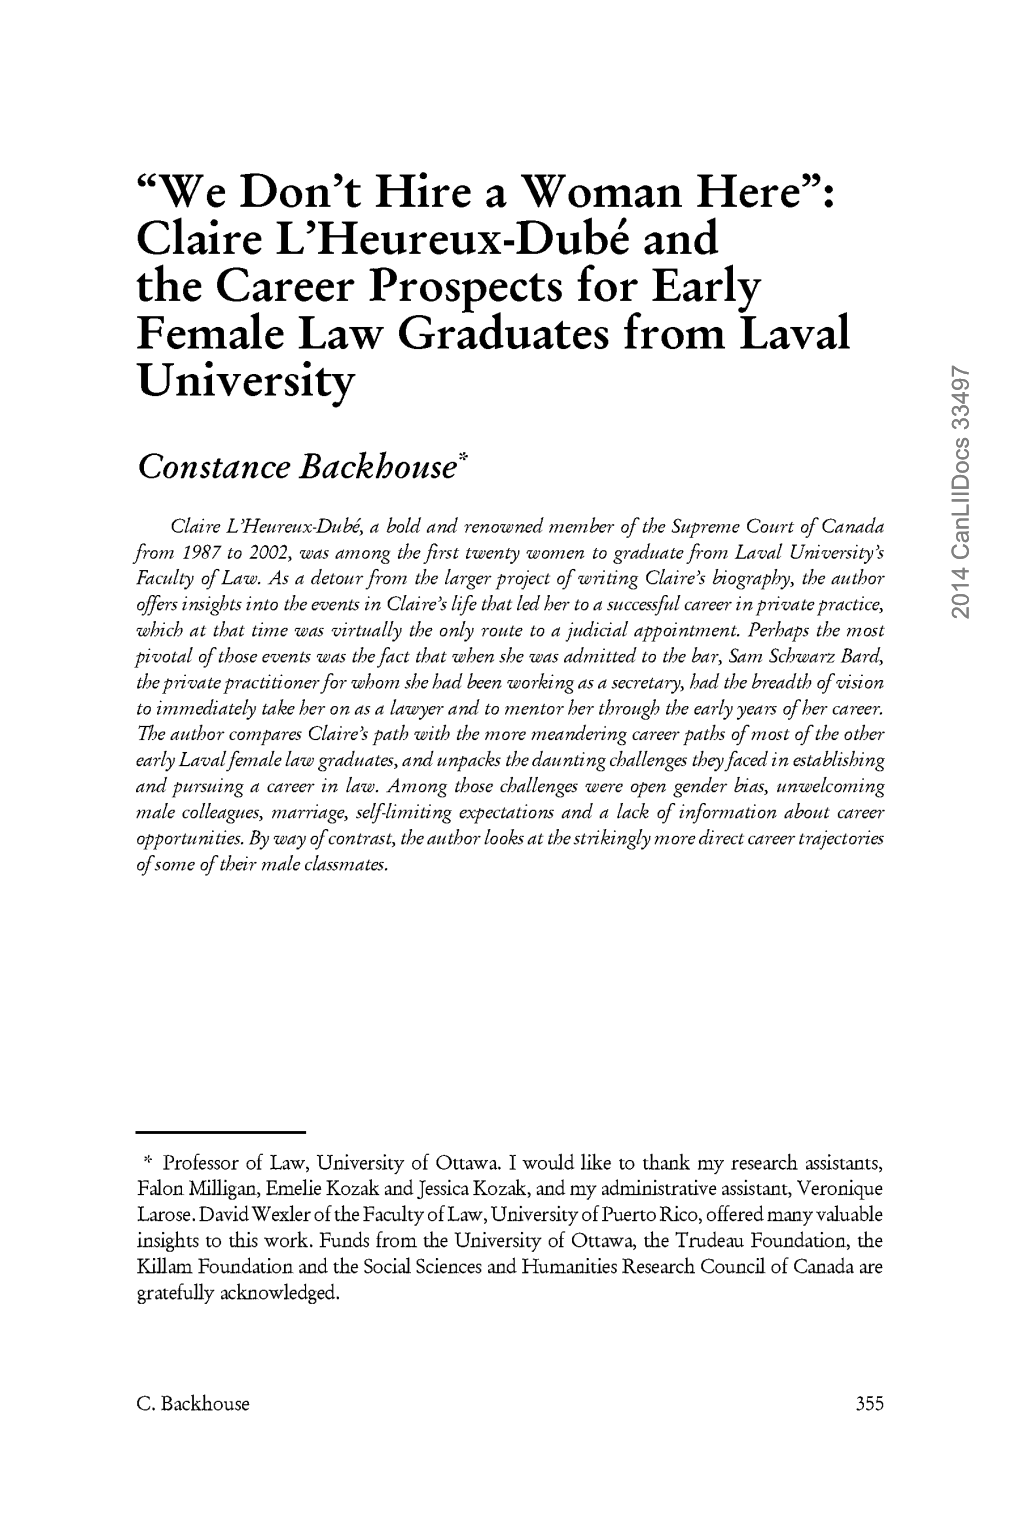 Claire L'heureux-Dub6 and the Career Prospects for Early Female Law Graduates from Laval University